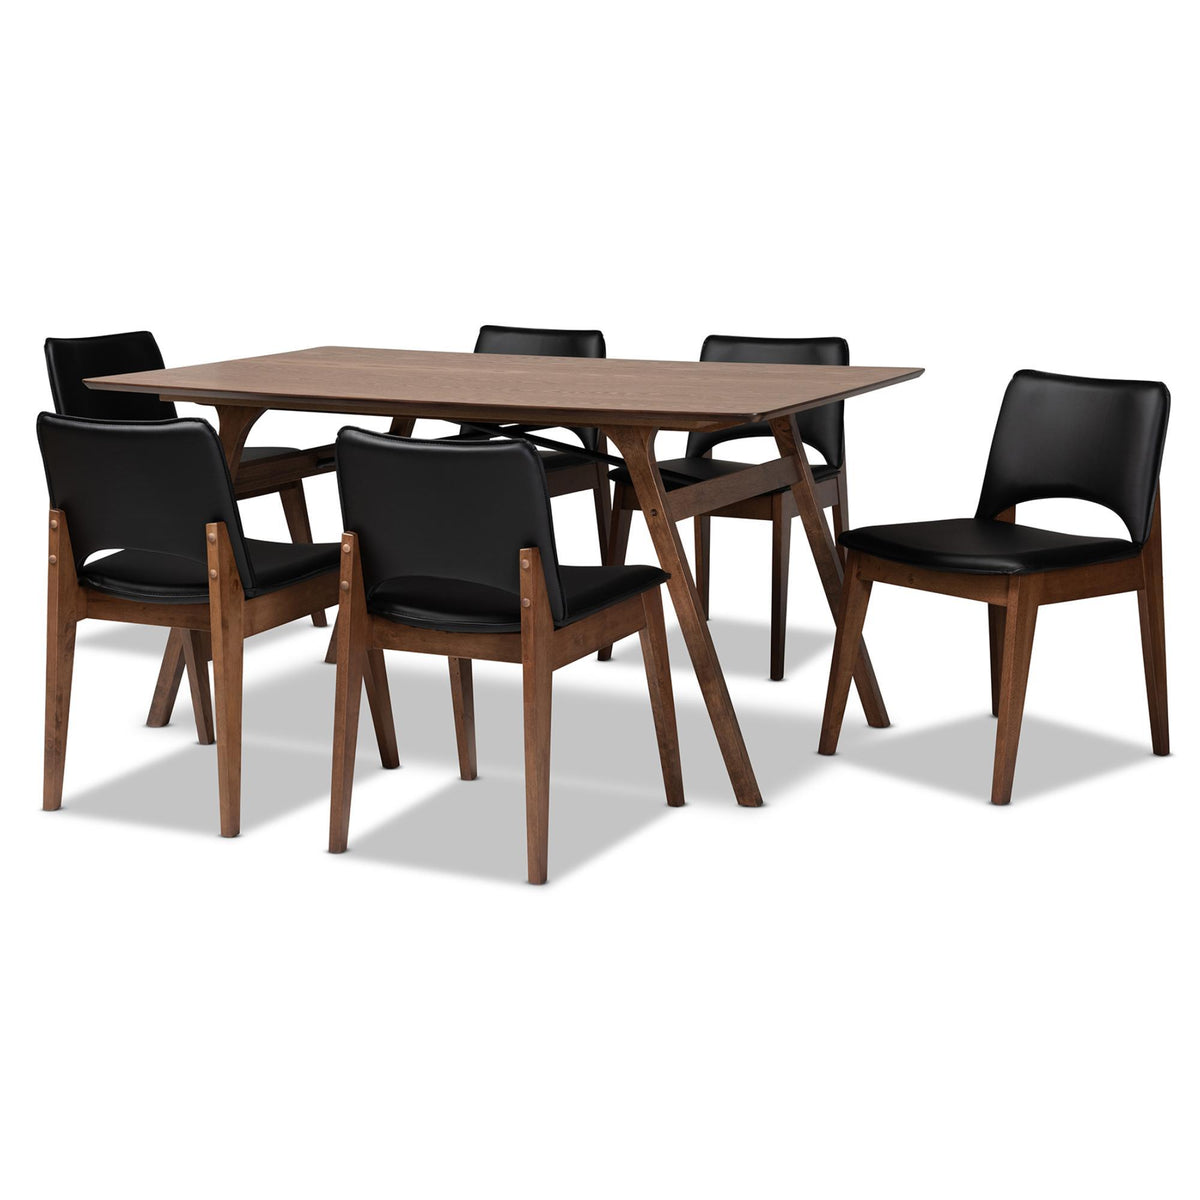 Baxton Studio Afton Mid-Century Modern Black Faux Leather Upholstered And Walnut Brown Finished Wood 7-Piece Dining Set - RDC827-Black/Walnut-7PC Dining Set